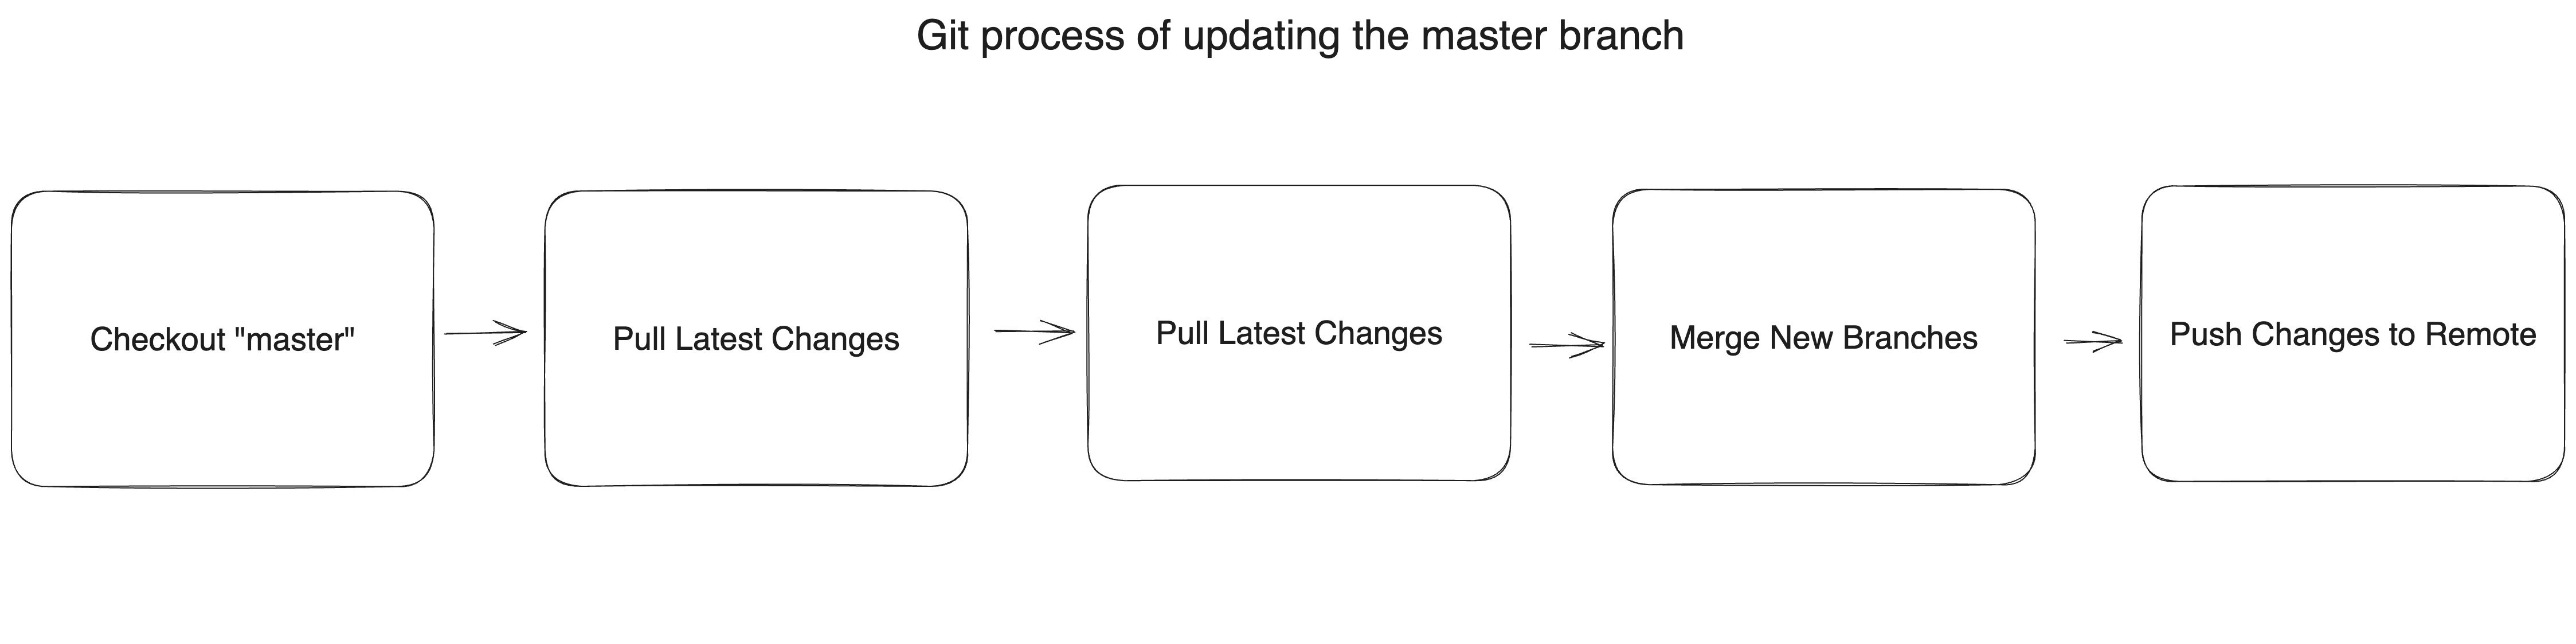 Git process of updating the master branch